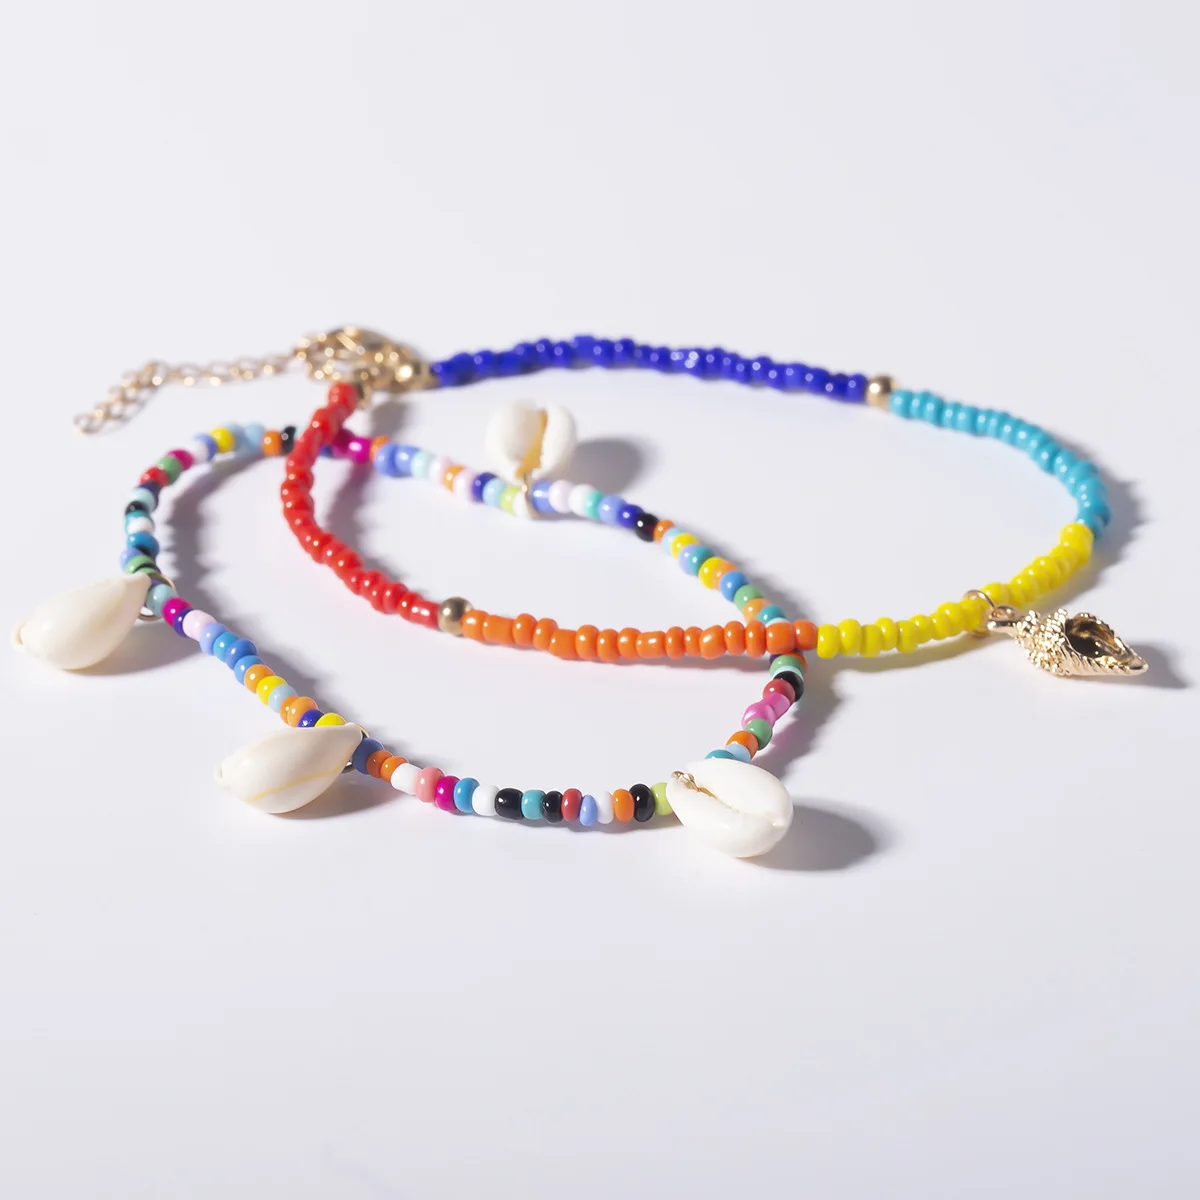 2pcs/set Bohemian Natural Sea Shell Beads Anklets for Women Coloful Bracelet On Leg Chain Anklet Summer Beach Foot Jewelry - Окраска металла: XRX0244